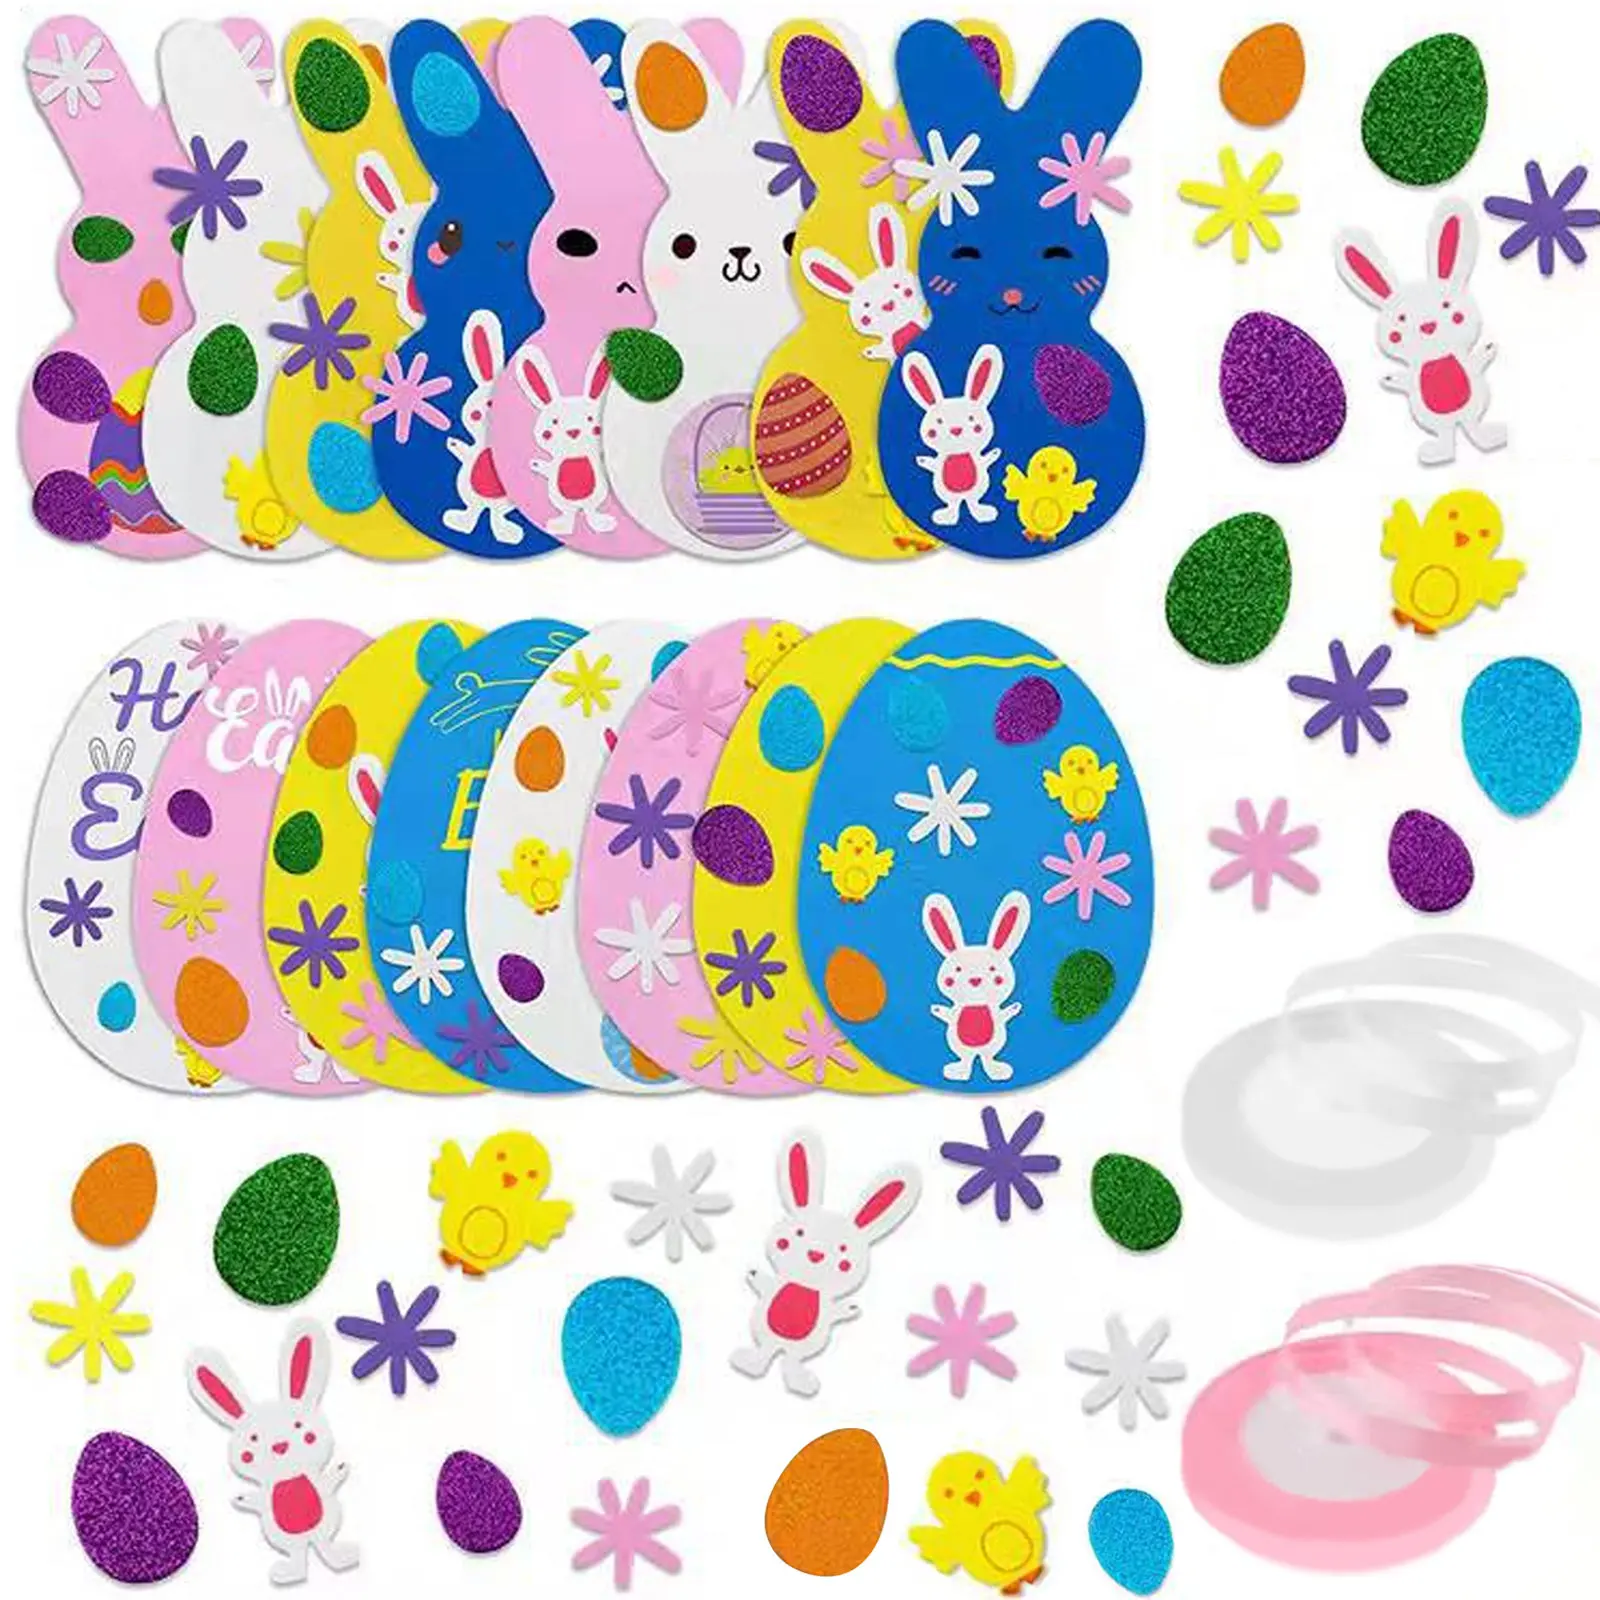 

Easter Foam Stickers Set Self Adhesive Stickers Glitter Egg Bunnies Chicks Flower Stickers DIY Easter Decorations for Kids